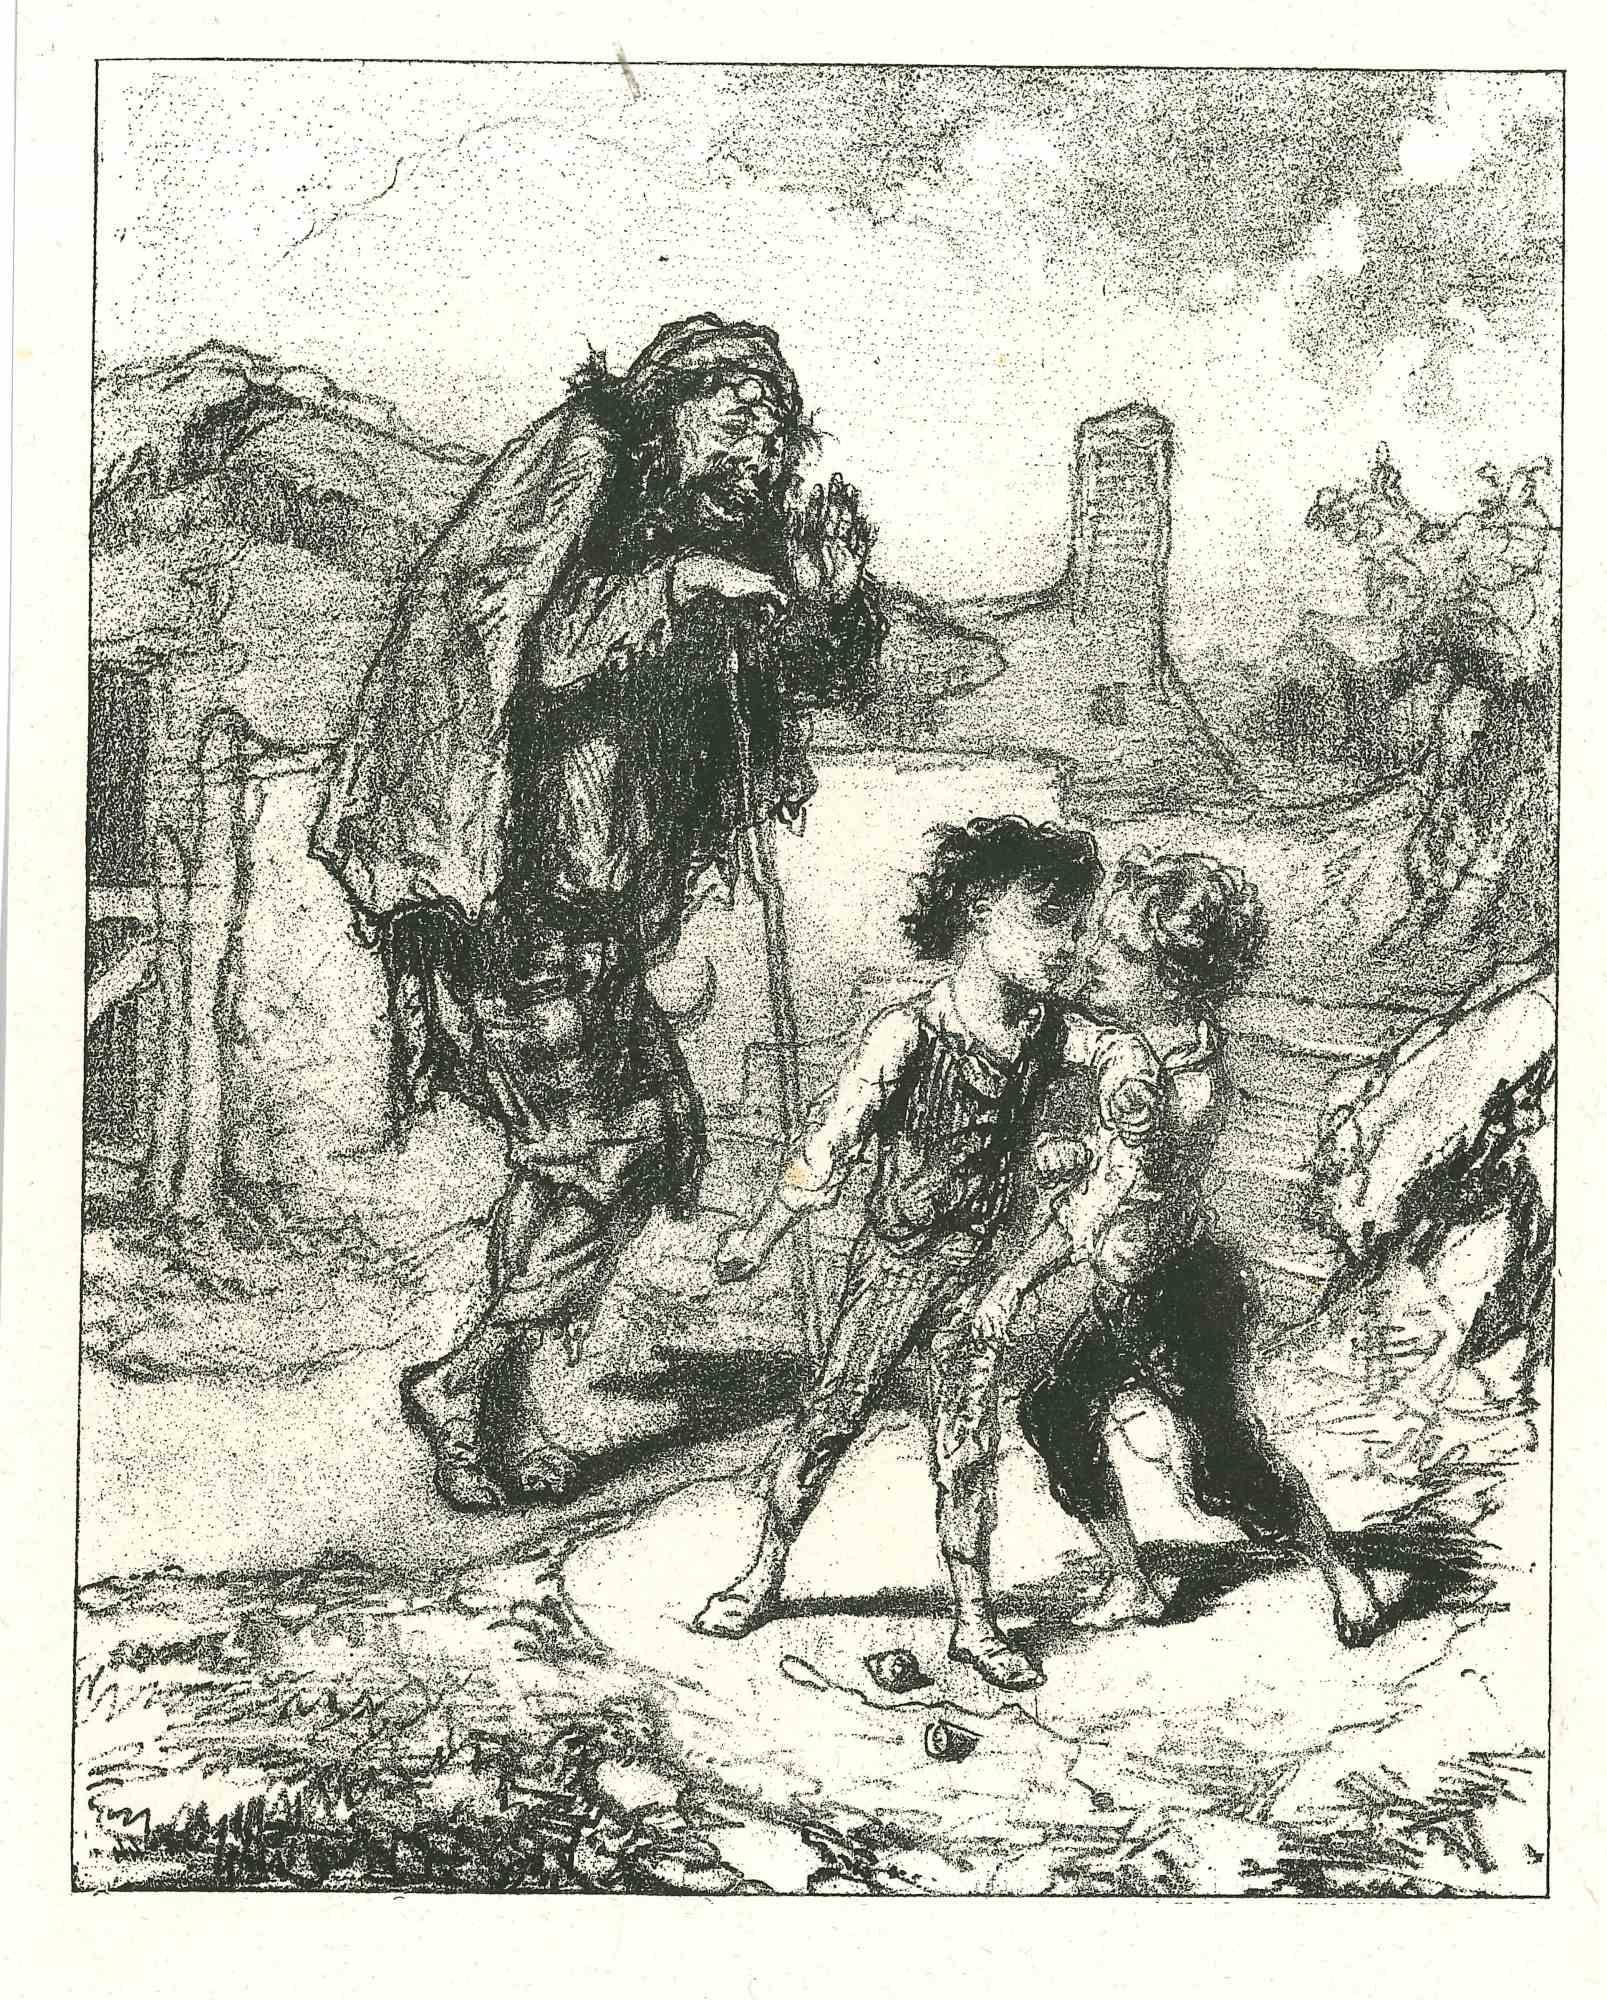 The passenger talking to children is an original lithograph artwork on ivory-colored paper, realized by the French draftsman Paul Gavarni (after) (alias Guillaume Sulpice Chevalier Gavarni, 1804-1866) in Paris, 1881, in the collection of